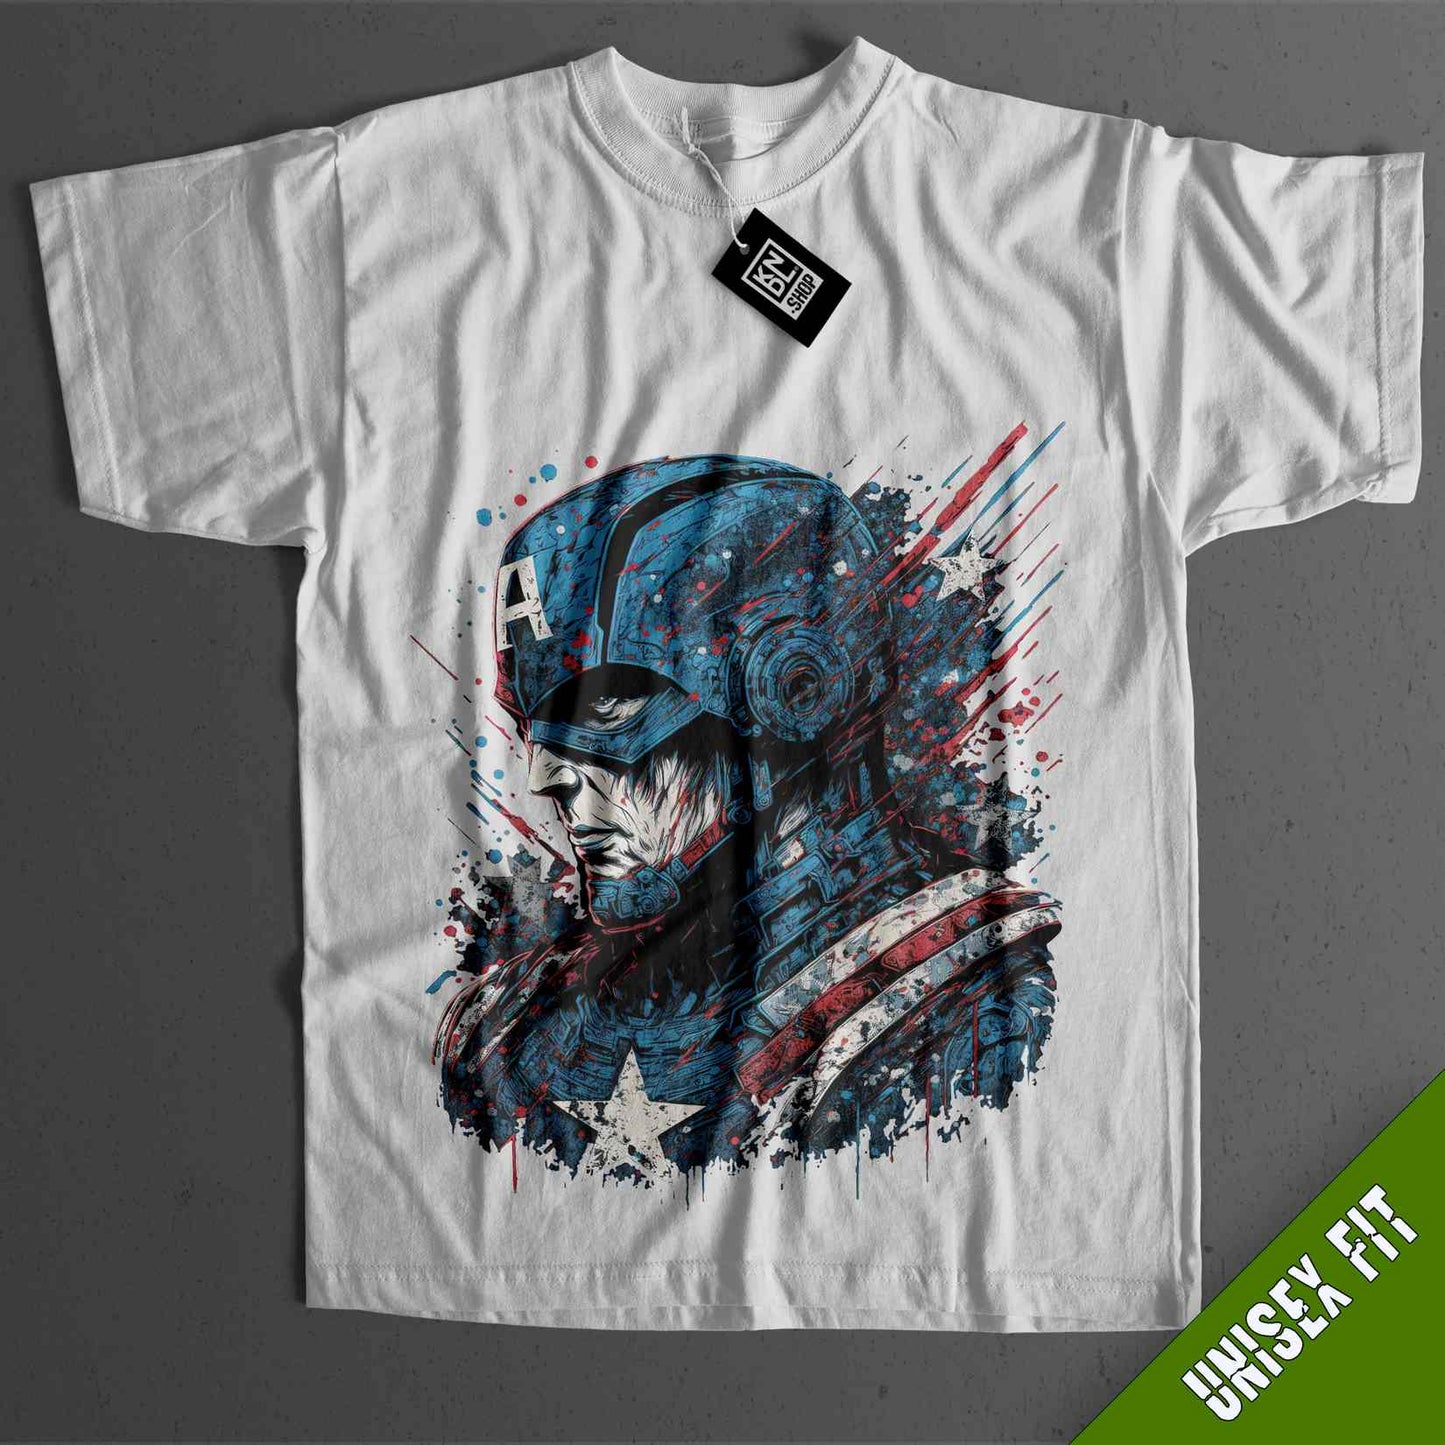 a white t - shirt with an image of captain america